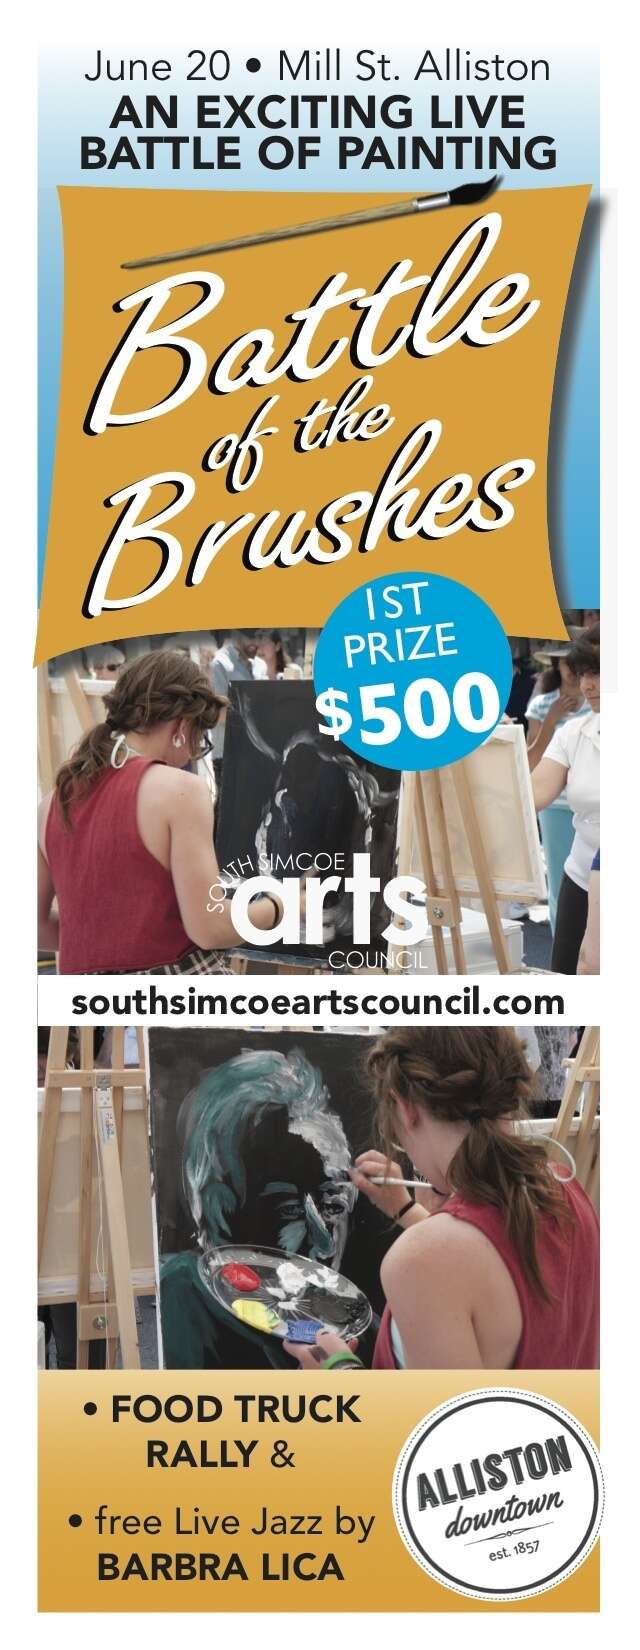 June 20, 2015 BATTLE OF THE BRUSHES  The ABIA has invited our Membership to showcase their artworks by allowing them to set up a table / booth at the 